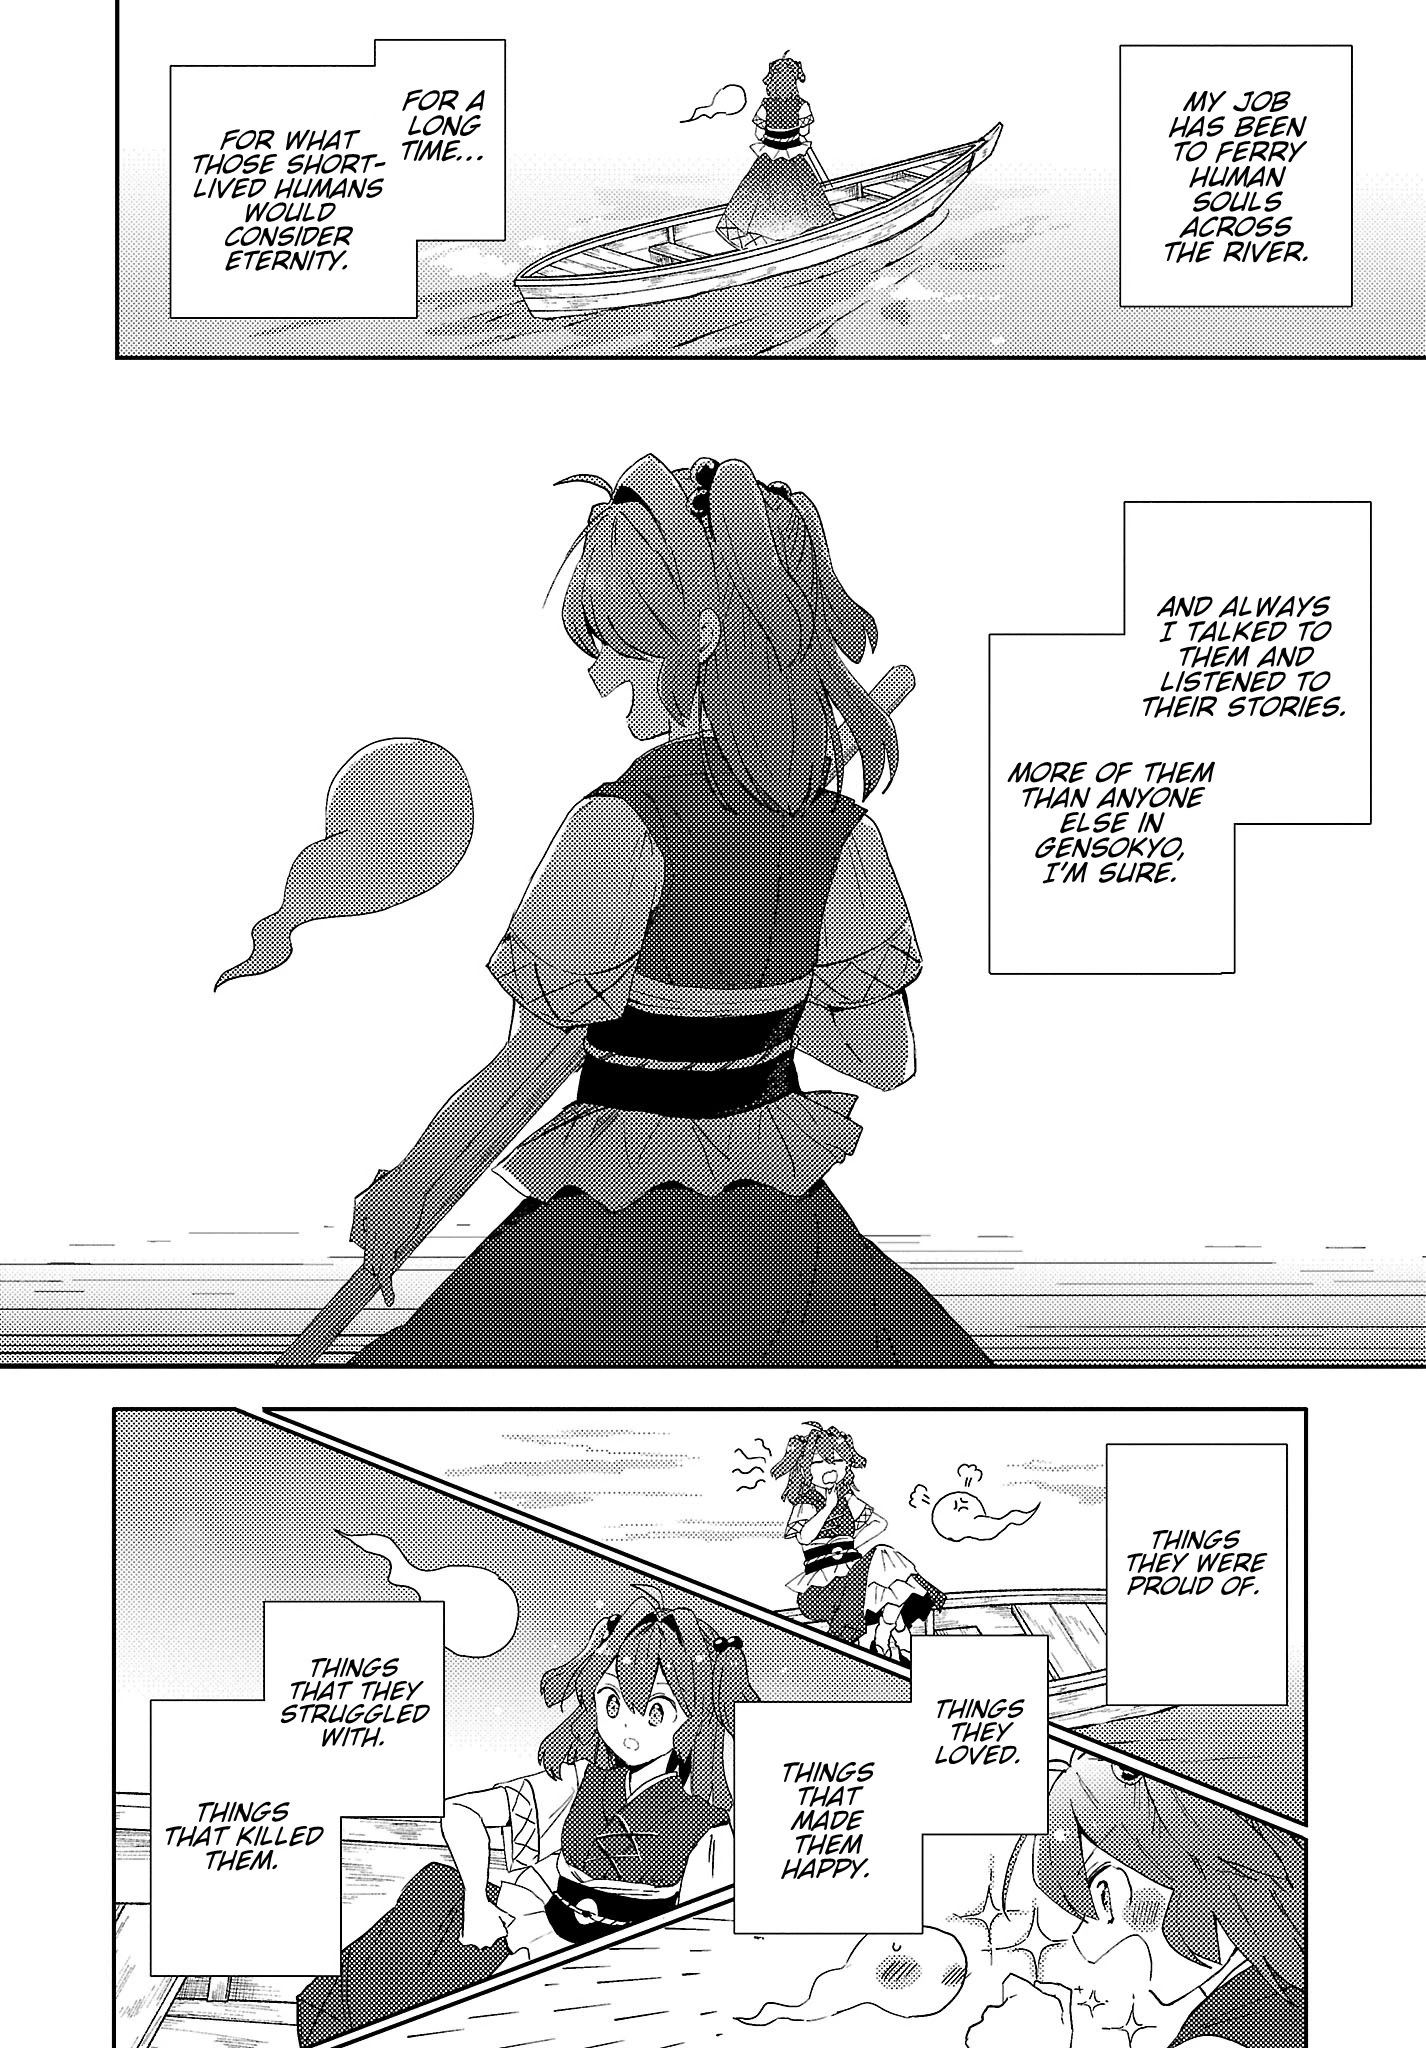 The Shinigami's Rowing Her Boat As Usual - Touhou Chapter 6 #2